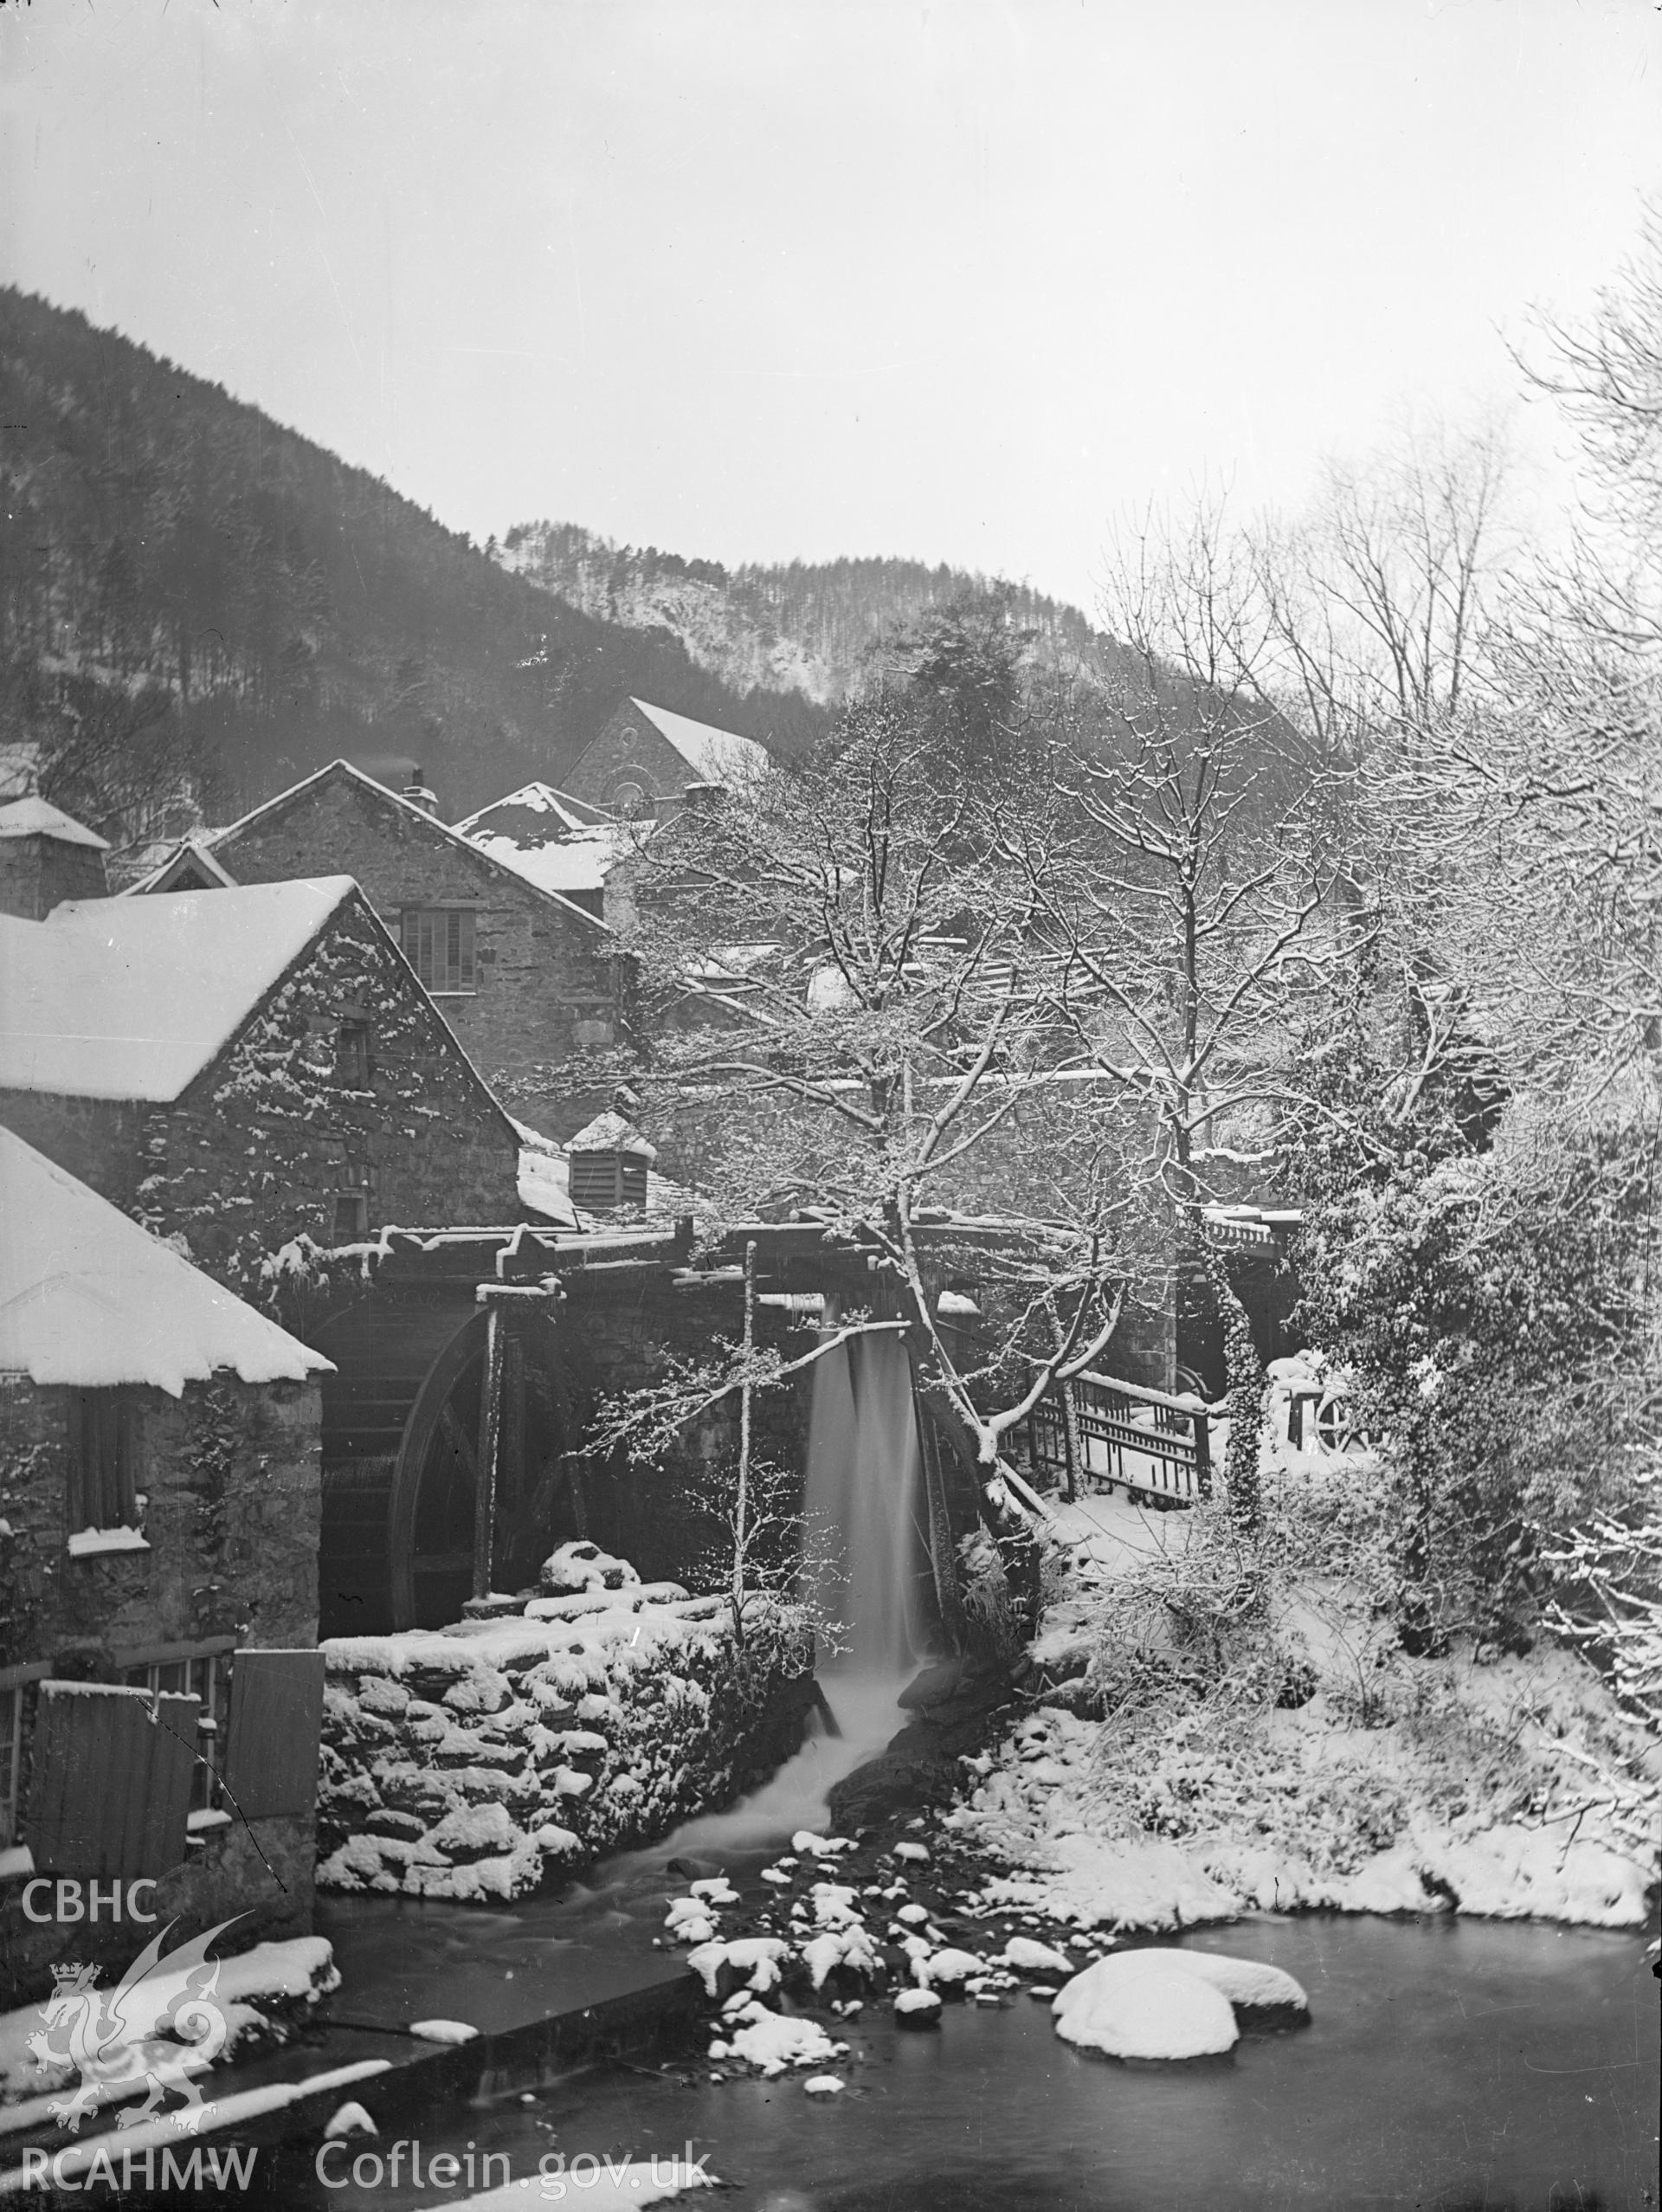 Digital copy of a glass plate showing view of a watermill in the Fairy Glen at Trefriw, taken by Manchester-based amateur photographer A. Rothwell, 1890-1910